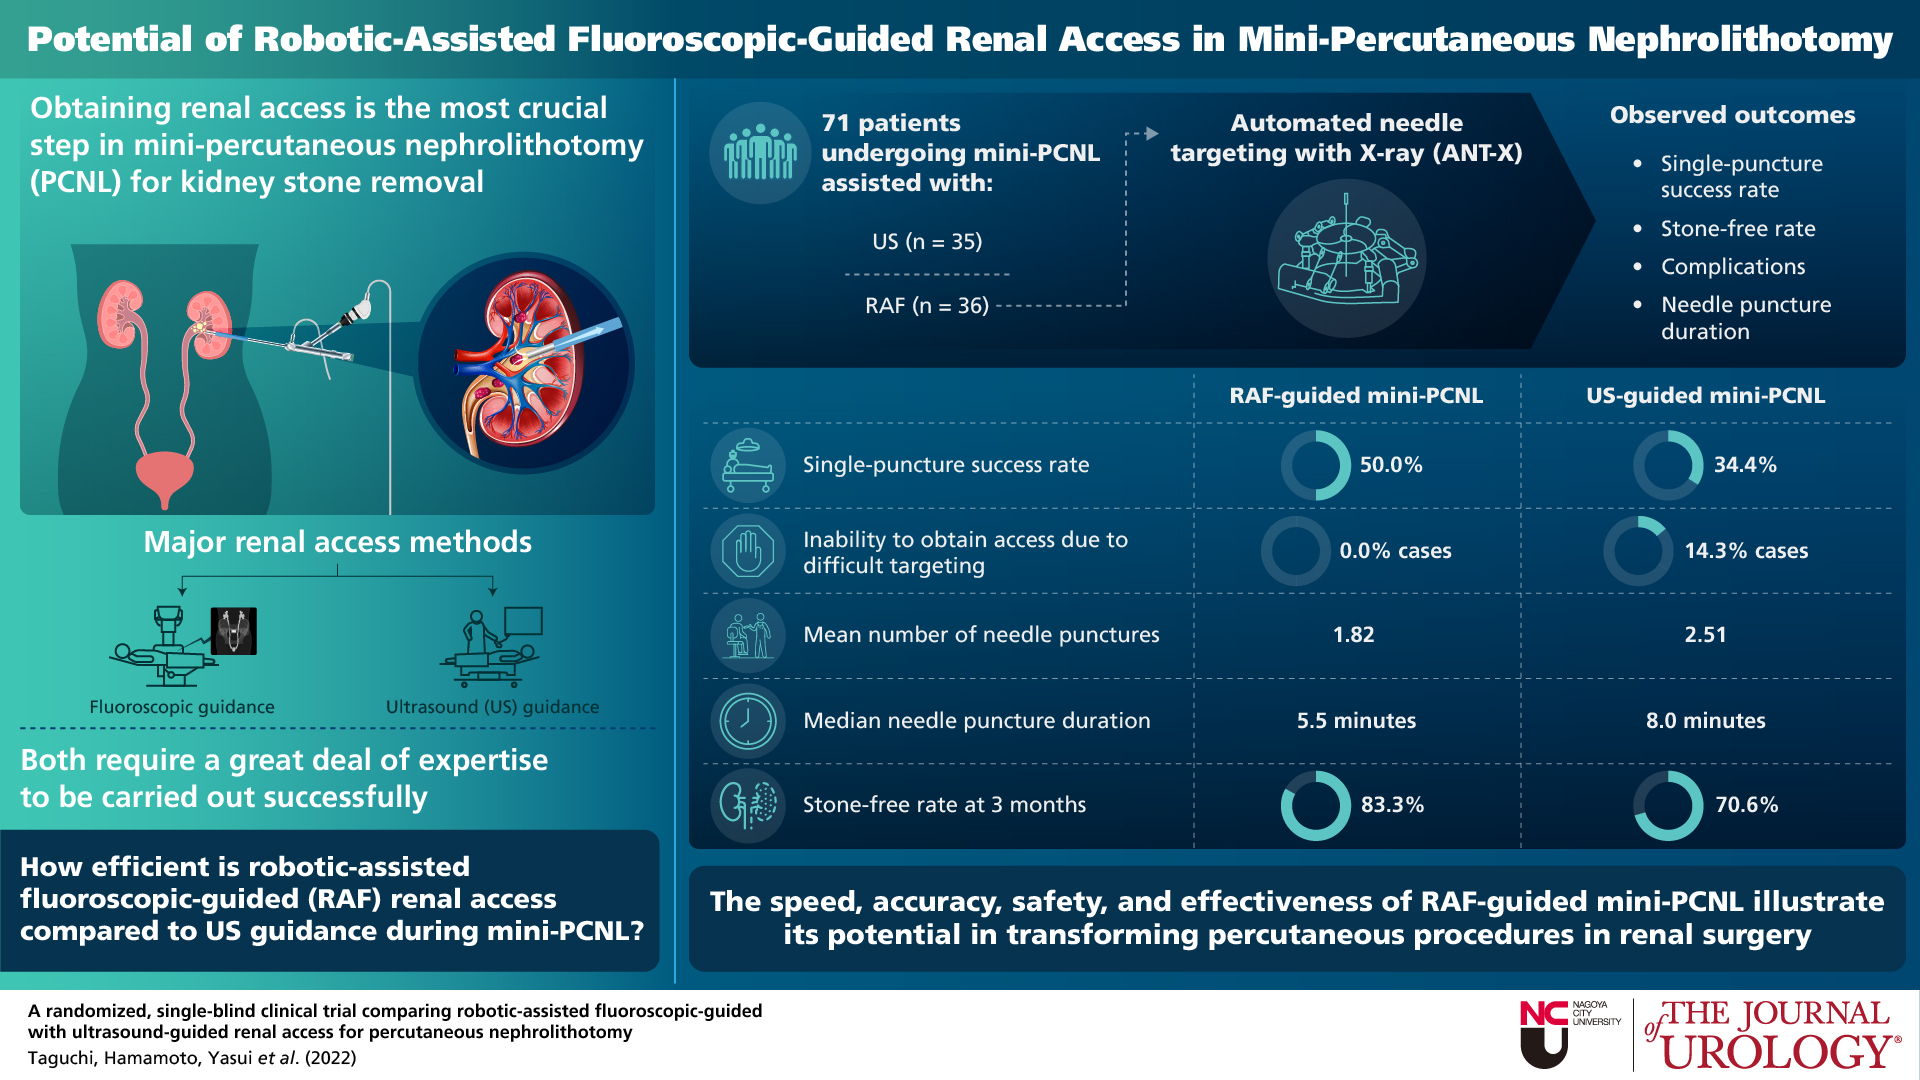 This is the visual abstract of the randomized, single-blind clinical trial comparing the surgical outcomes of robotic-assisted fluoroscopic-guided and ultrasound-guided renal access in mini-percutaneous nephrolithotomy (PCNL).